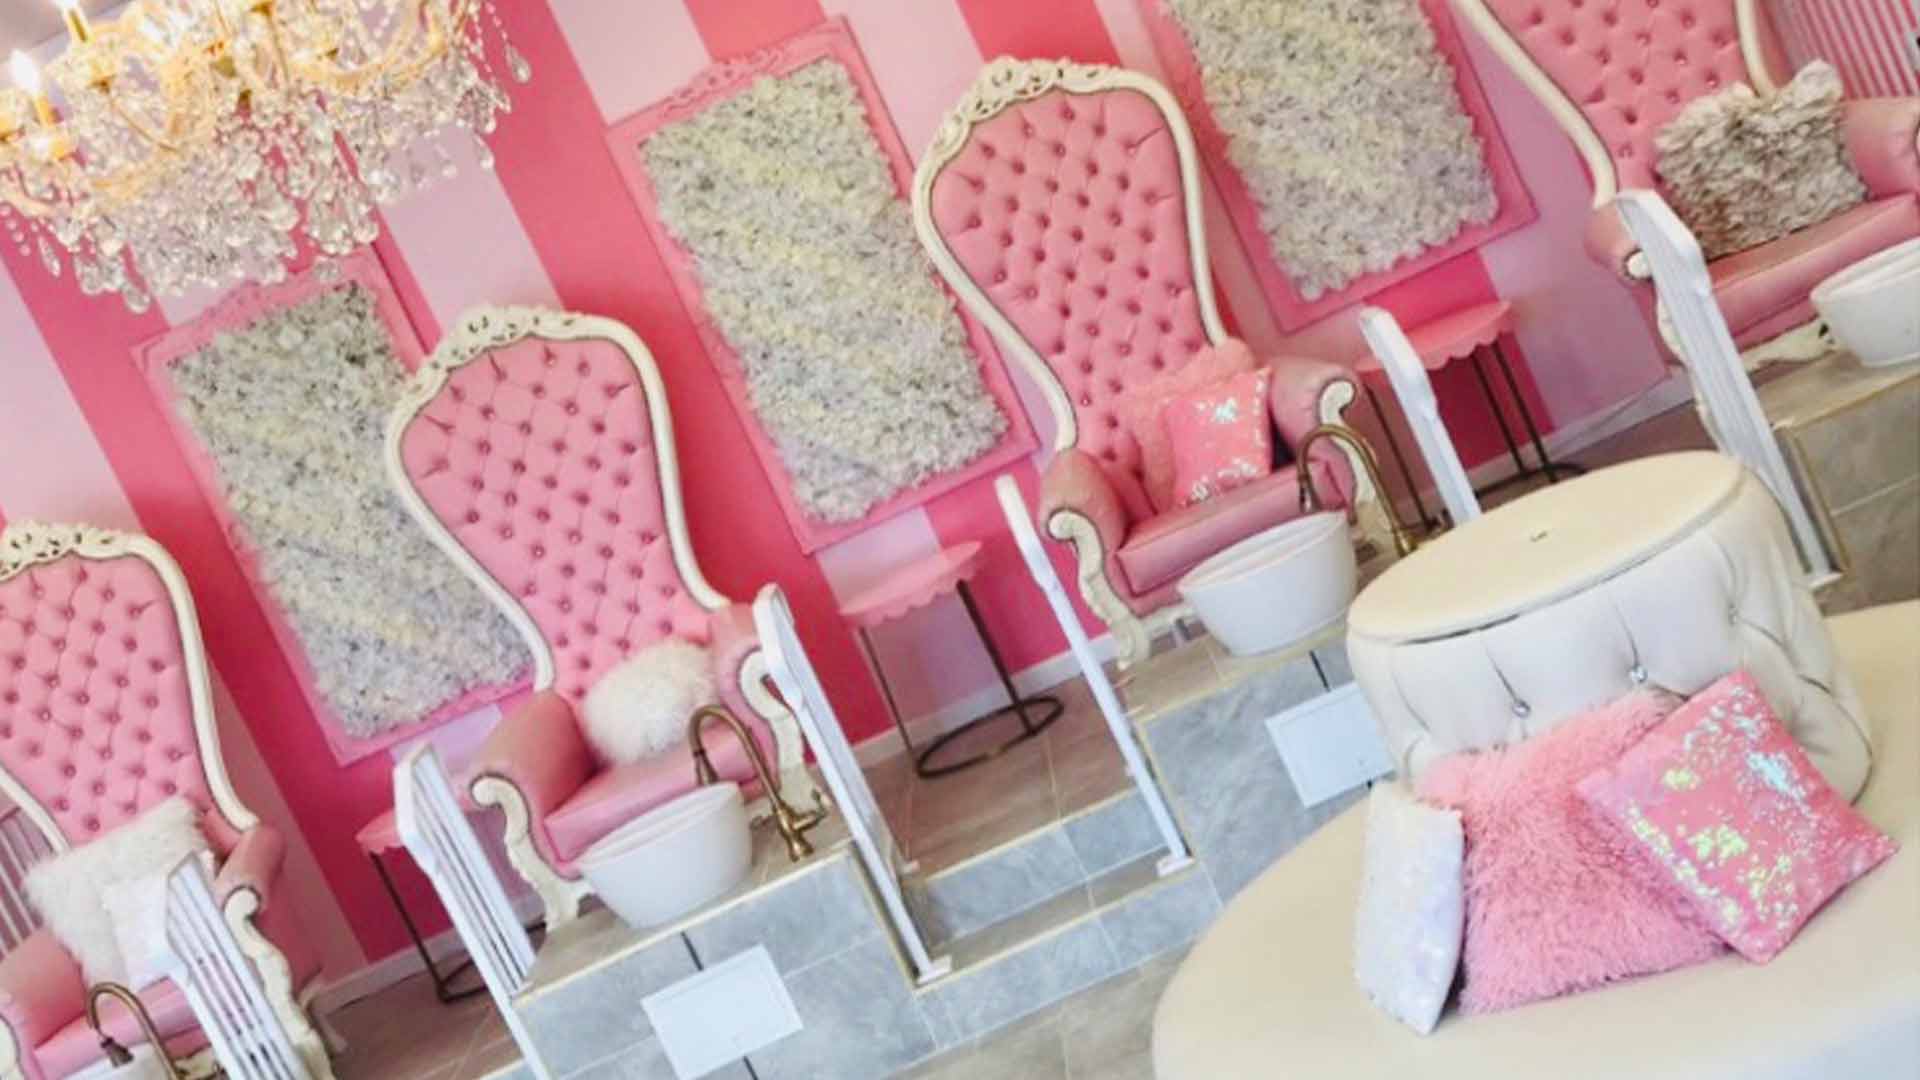 Skip the Nail Salon: 5 Mother Daughter Ideas for a Girls Day Out - KAKE